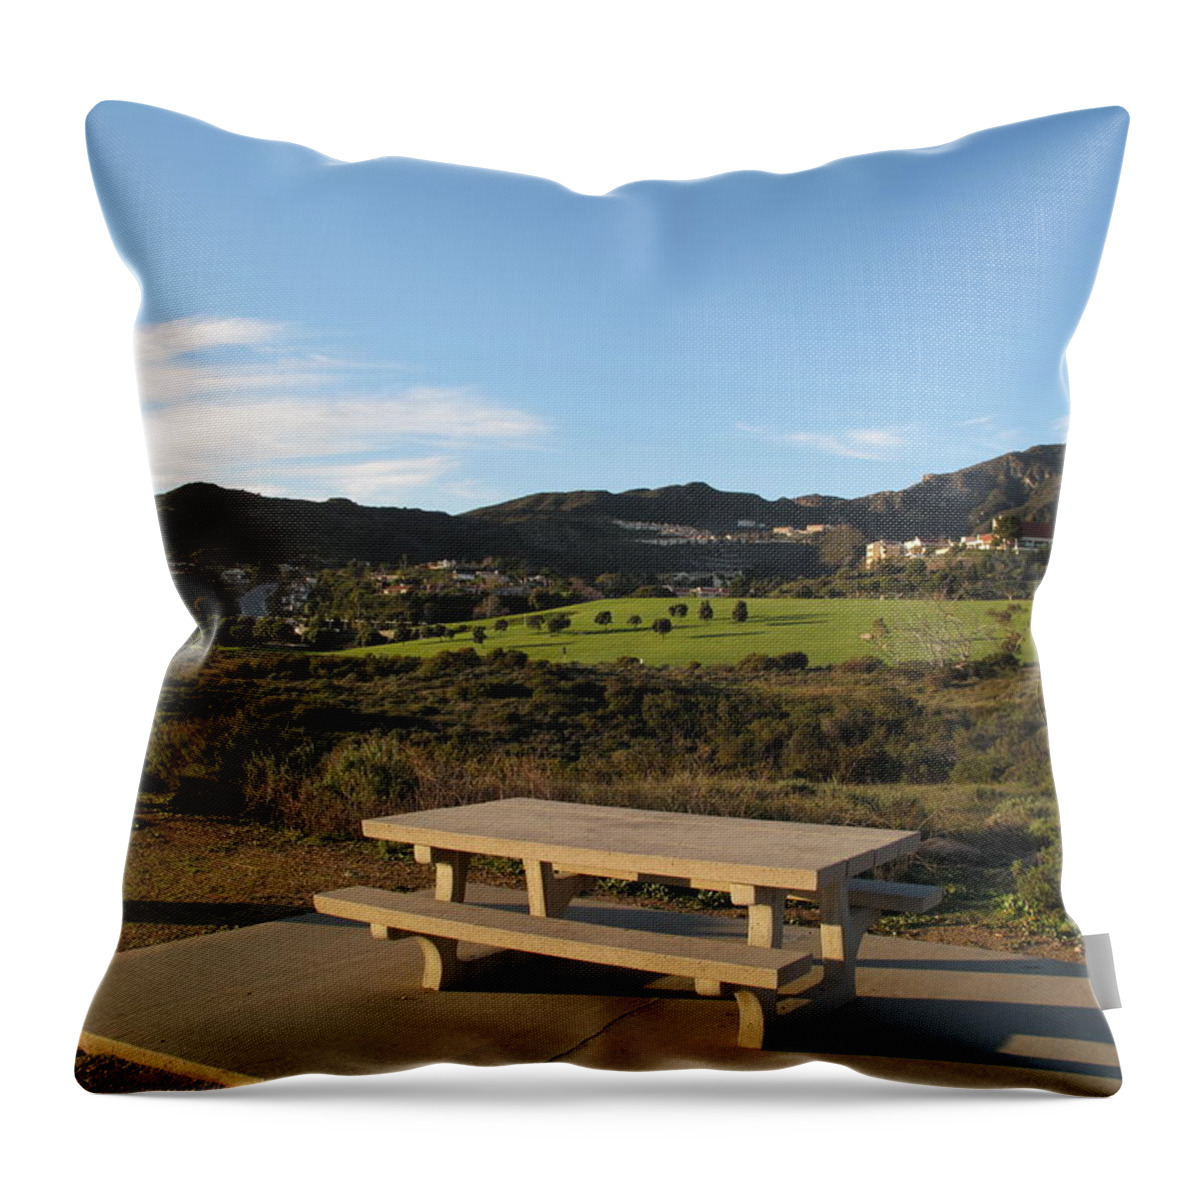 Tranquility Throw Pillow featuring the photograph Park Bench In Malibu by Marianna Sulic